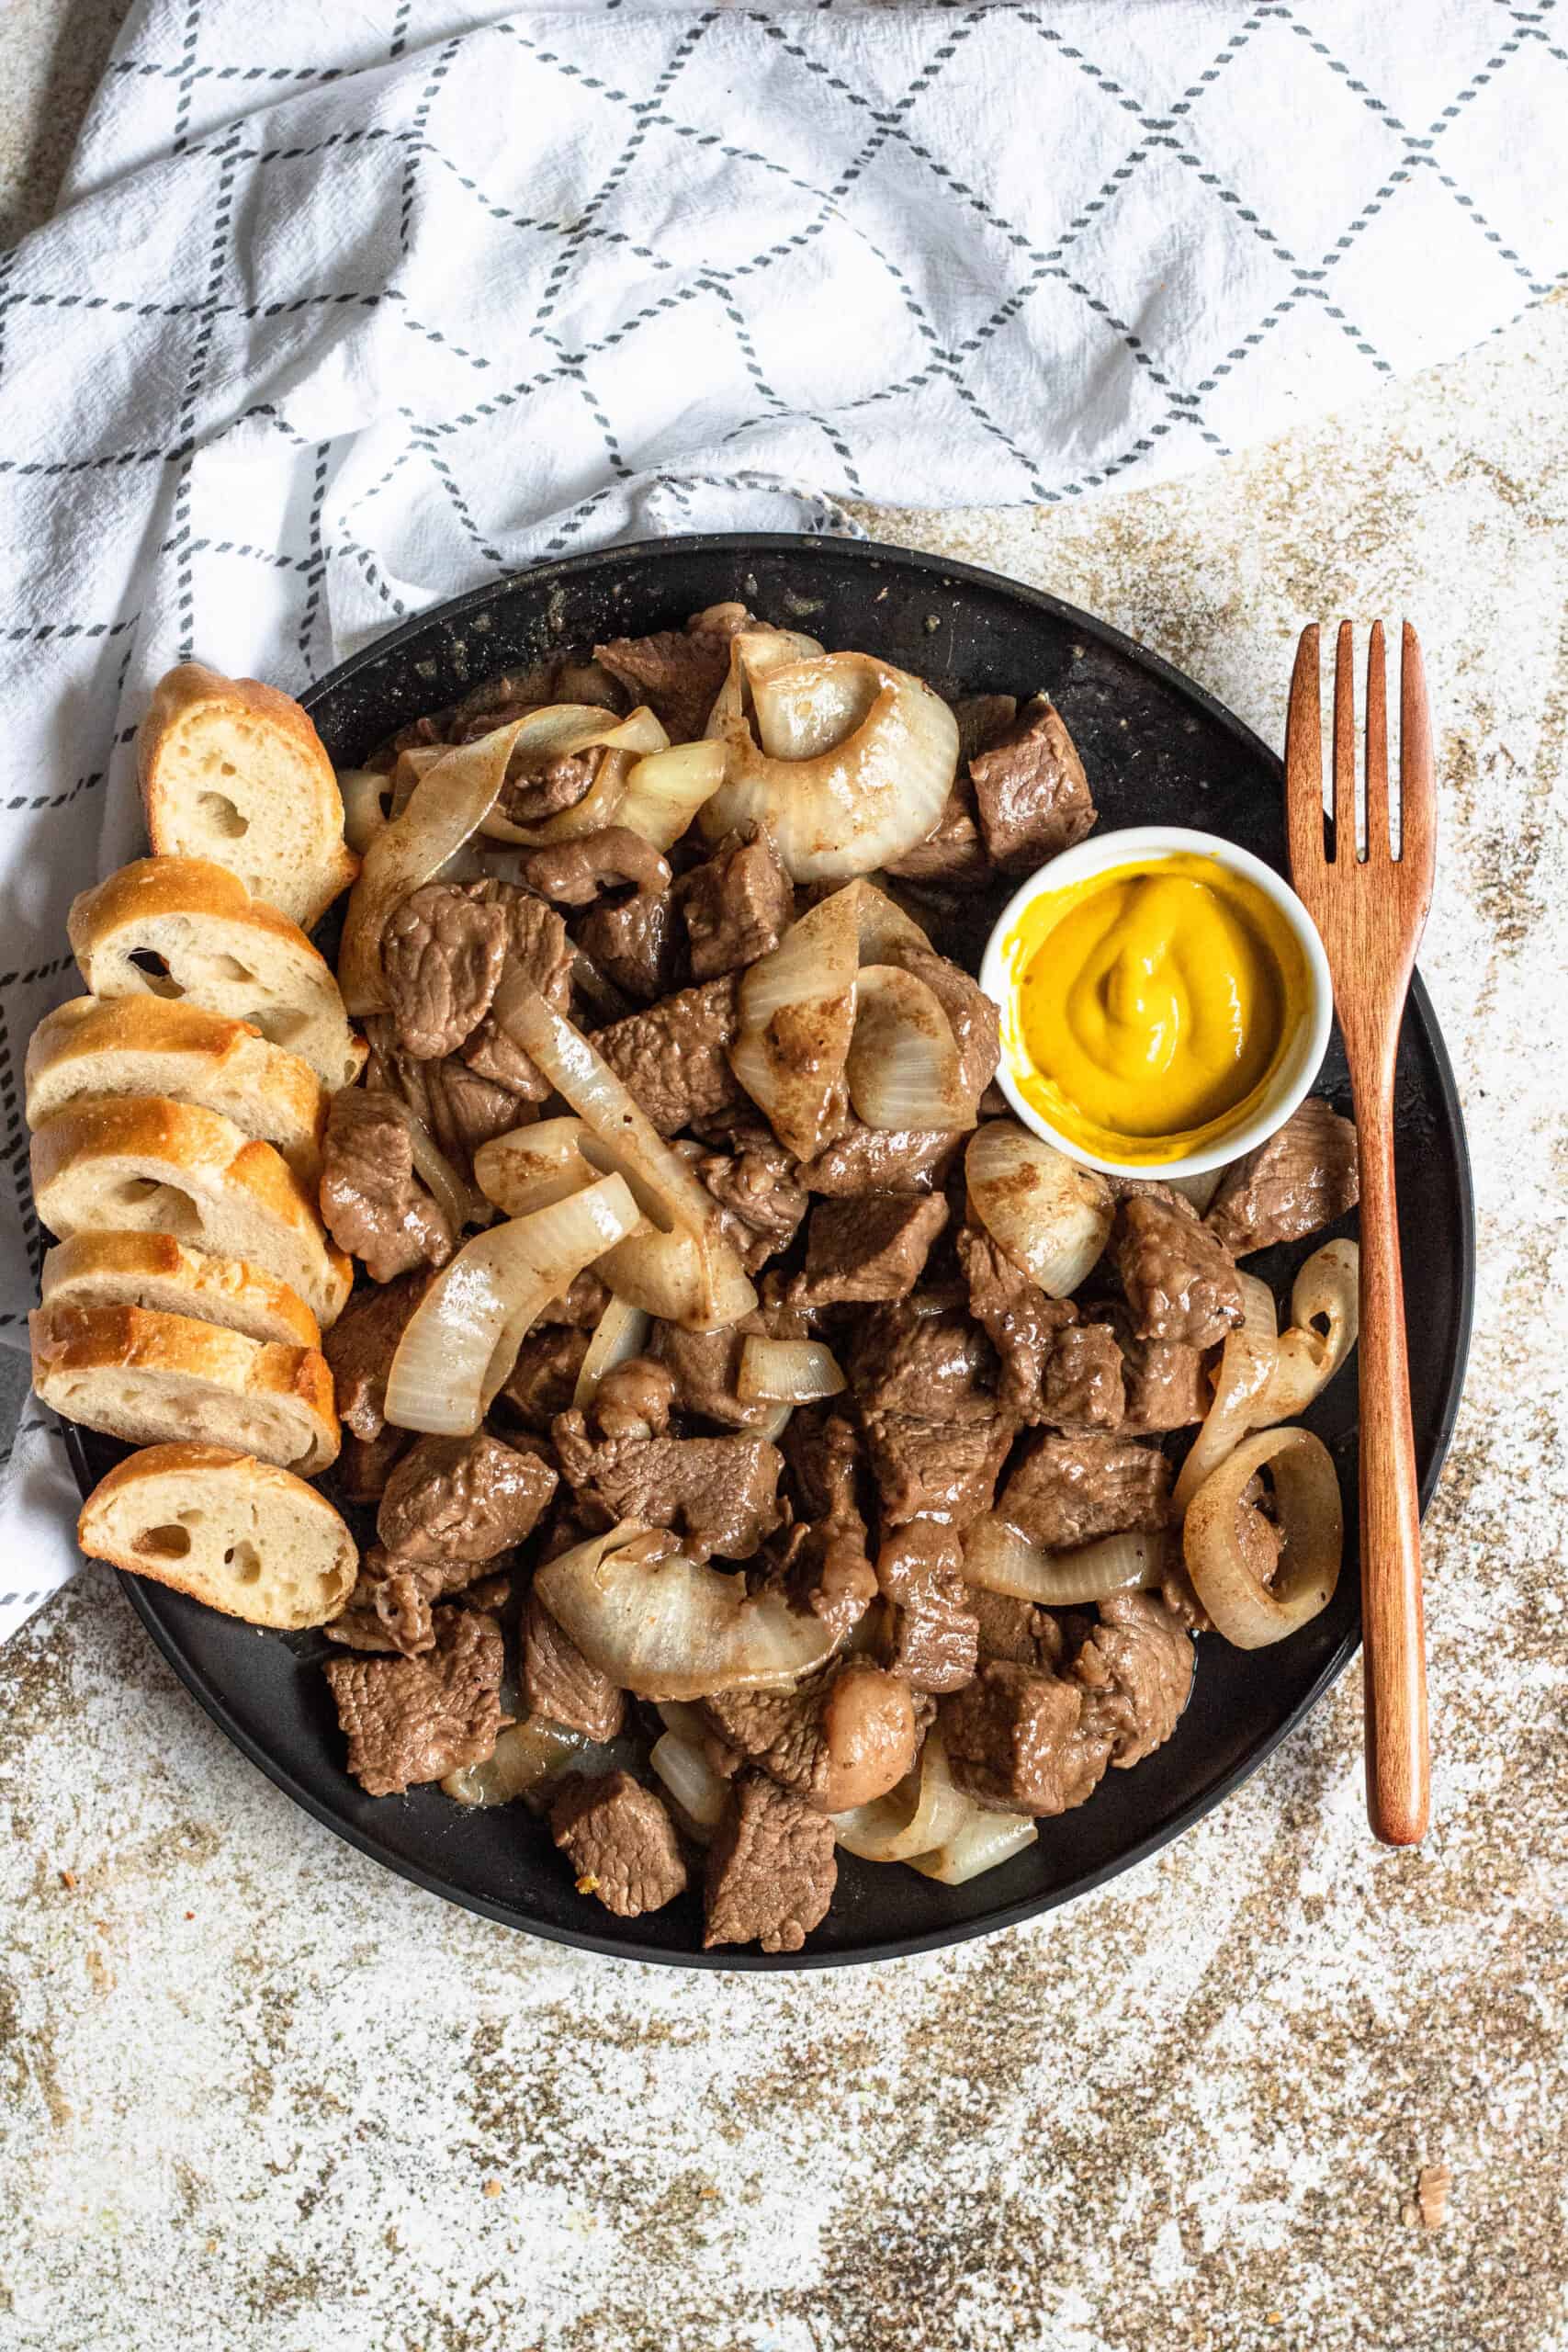 Cubed steak on a plate with cooked onions and baguette slices.